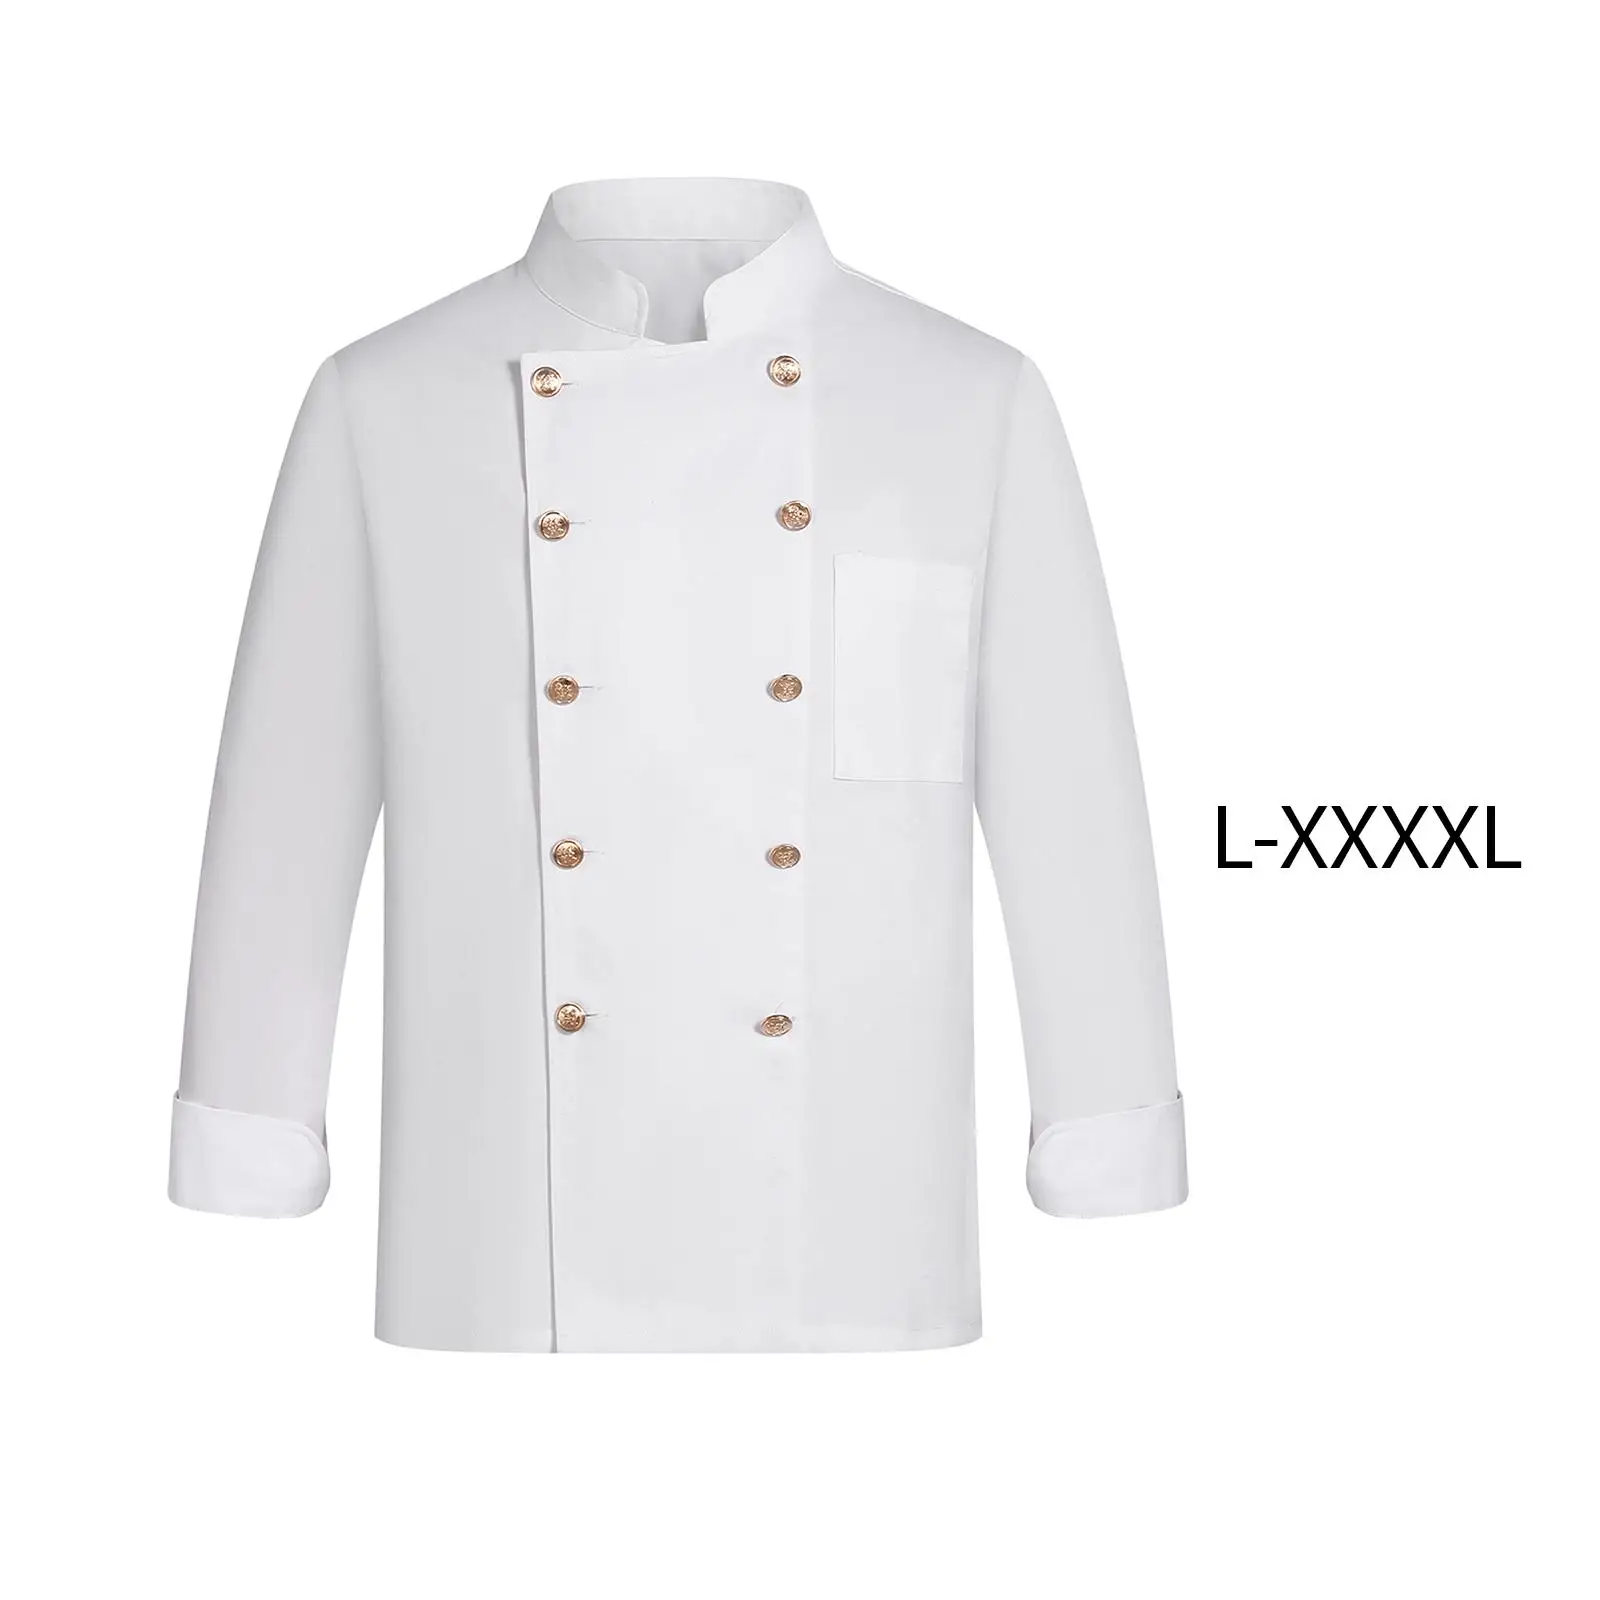 Universal Chef Clothes Workwear Jacket Breathable Sweat Absorption Abrasion Resistant Industry Restaurant Kitchen Waiter Hotel